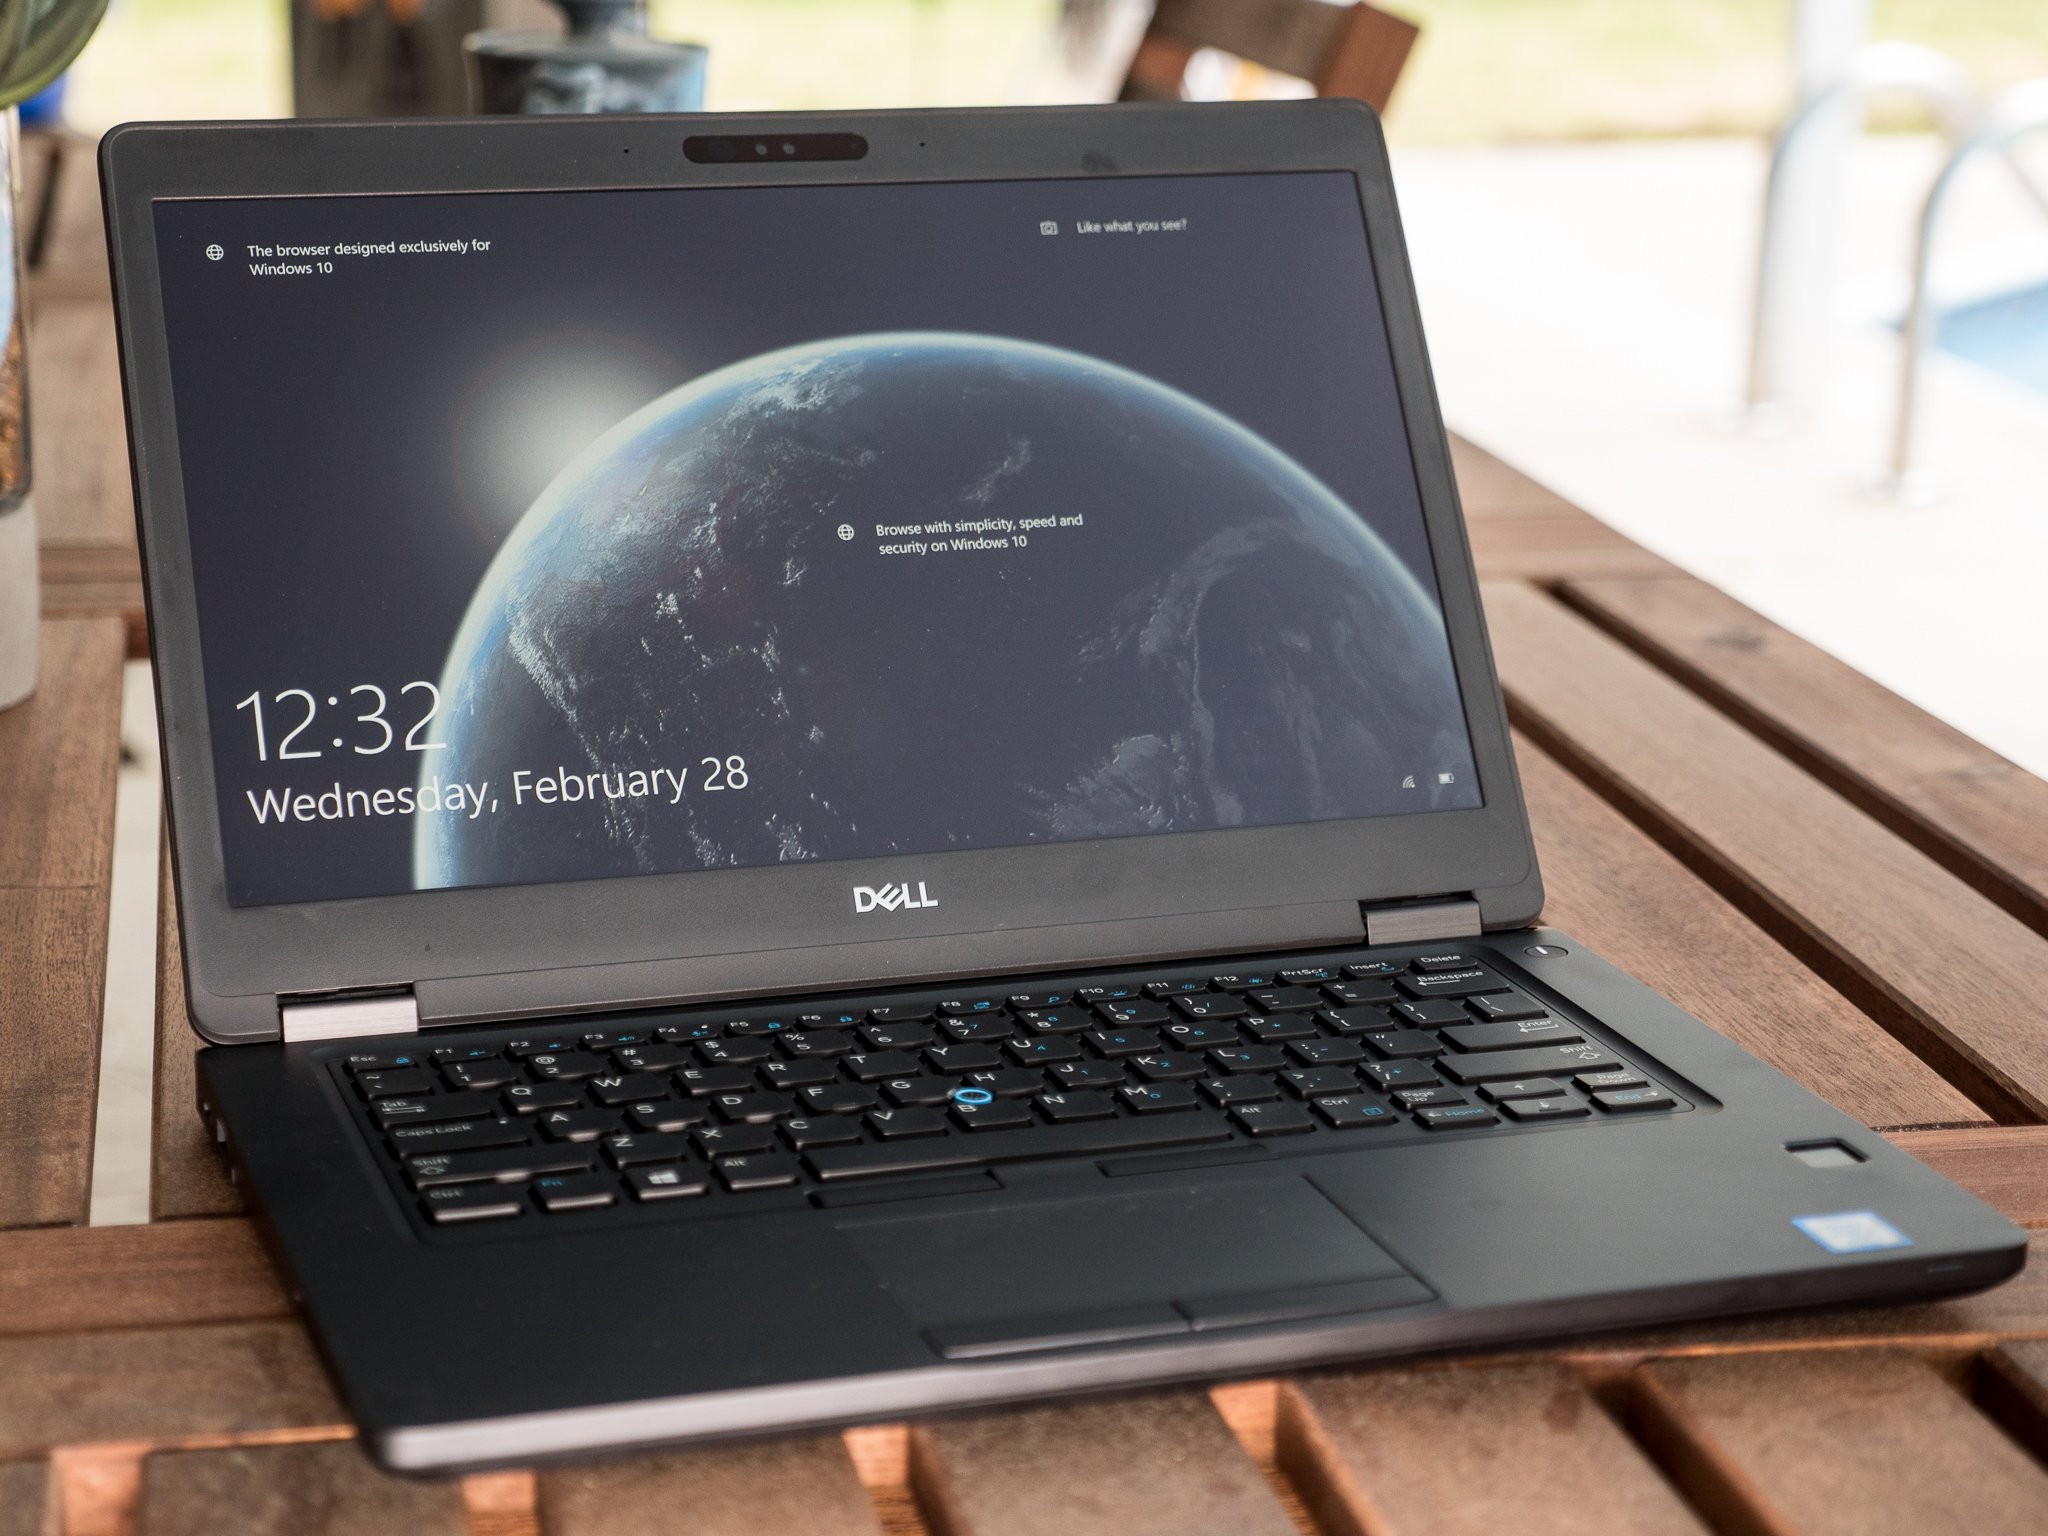 Dell Latitude 5490 review: All business, all the time | Windows 